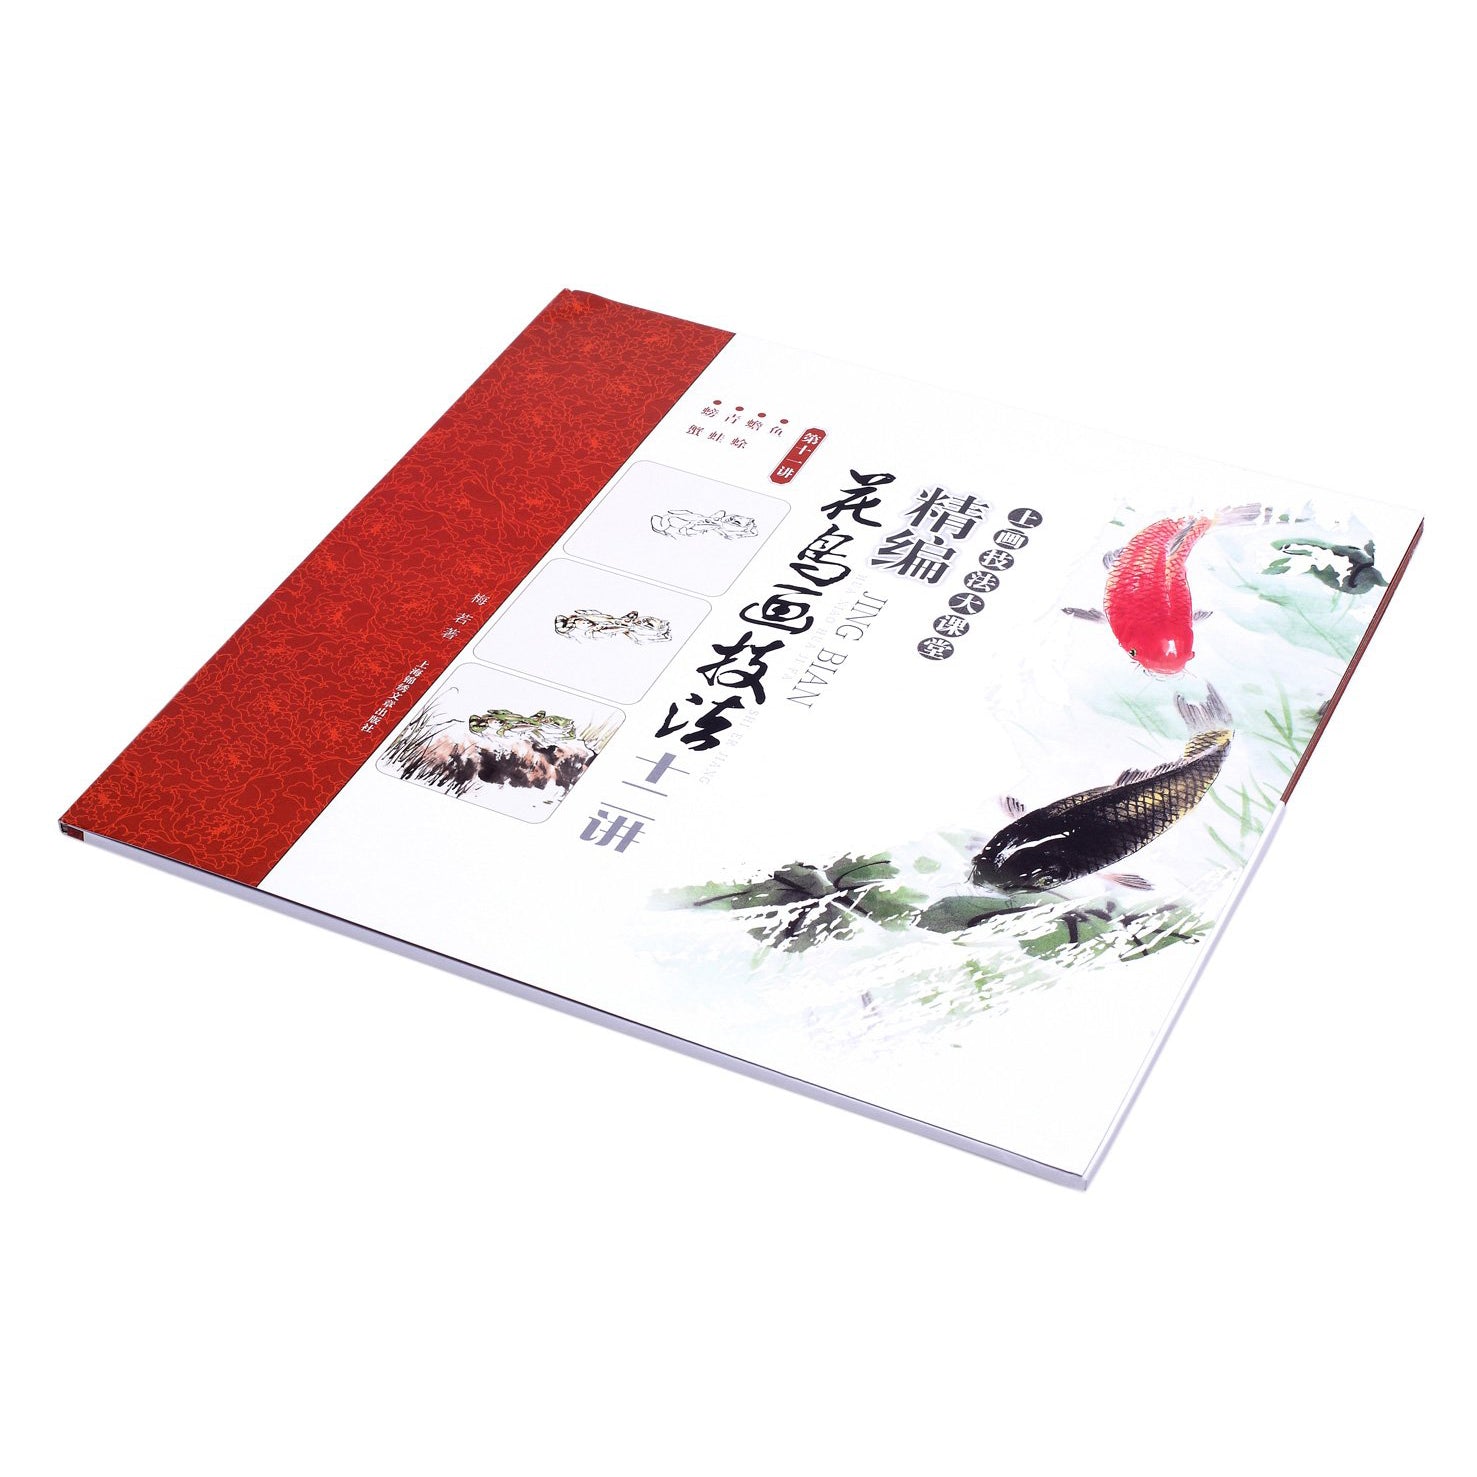 This May´s specific deck of cards focuses on animals living and or around the water and which are traditionally often depicted on Chinese and Japanese brush painting artworks.